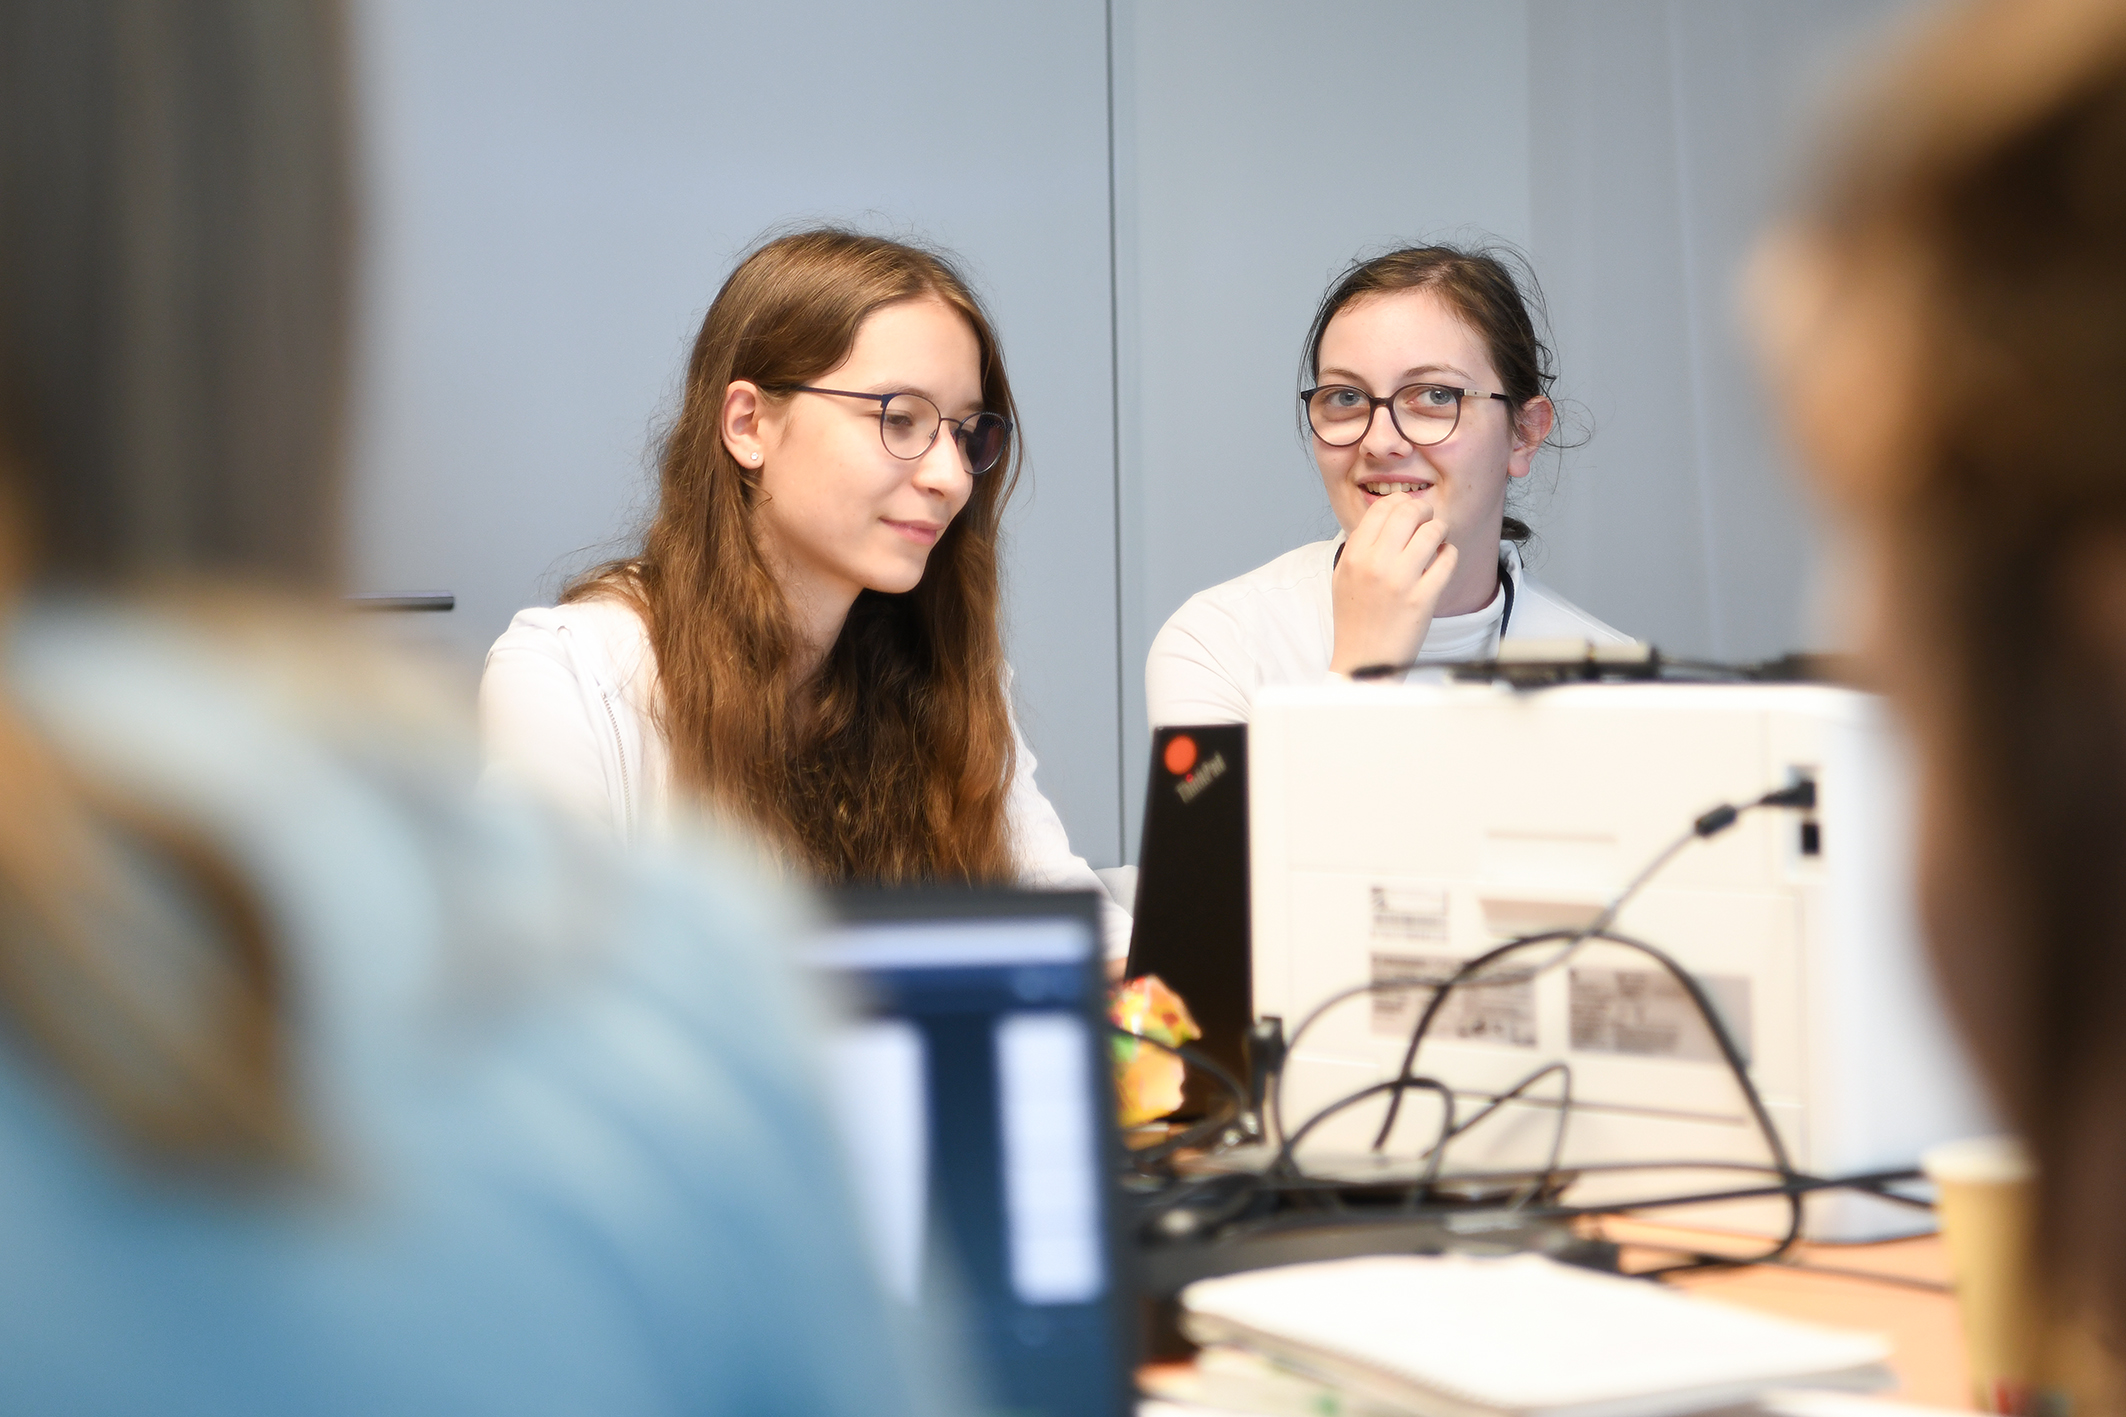 The »Mathematical modeling of scratches« team is hard at work. The picture shows Miriam and Franziska.